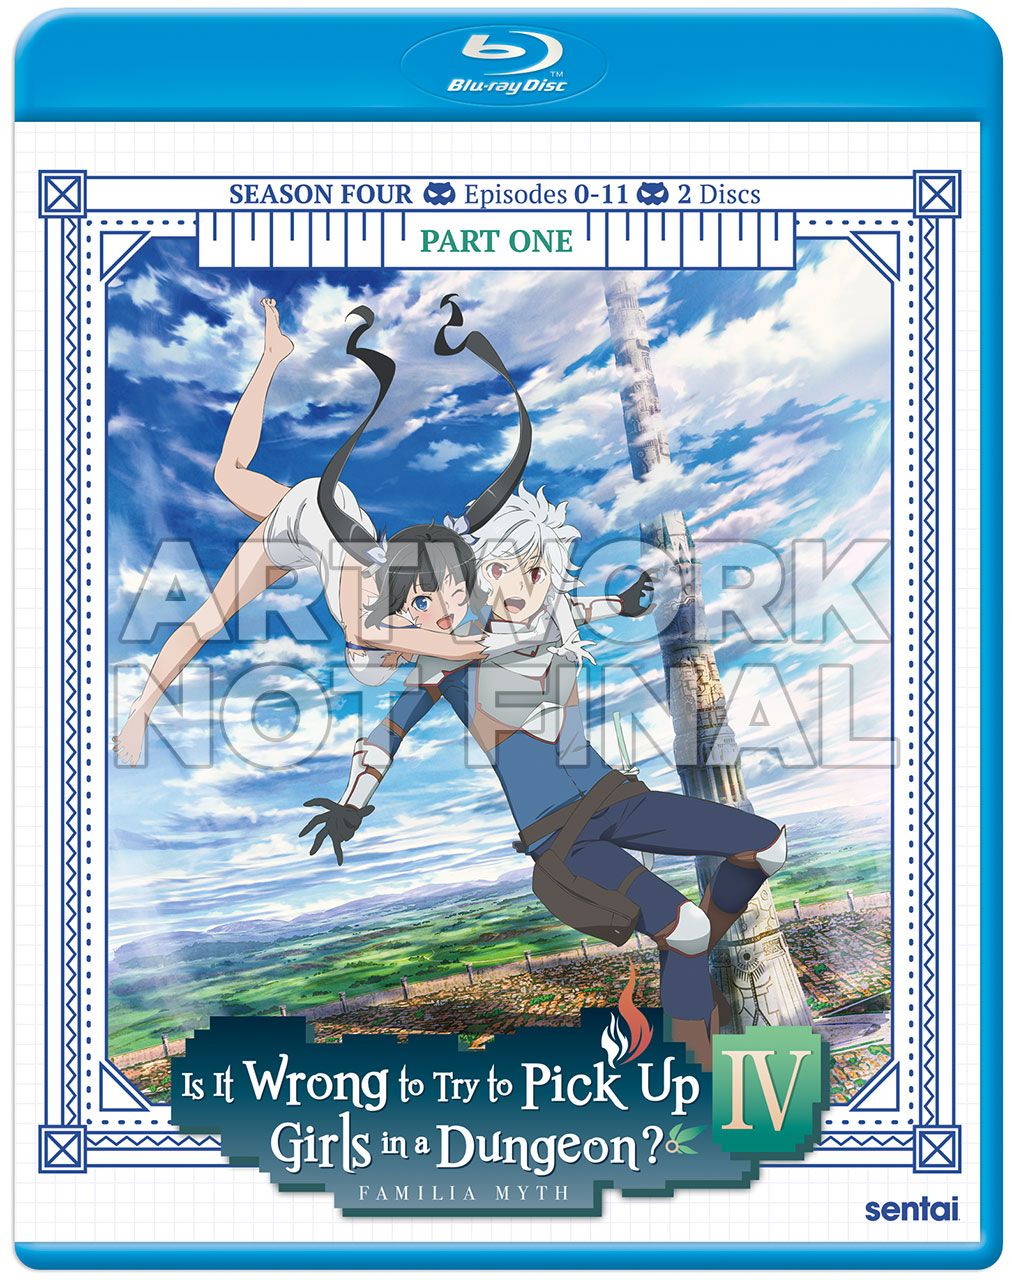 Is It Wrong To Try To Pick Up Girls In A Dungeon? Season 4 Part 1 Blu-ray. Cover art provided by Sentai Filmworks